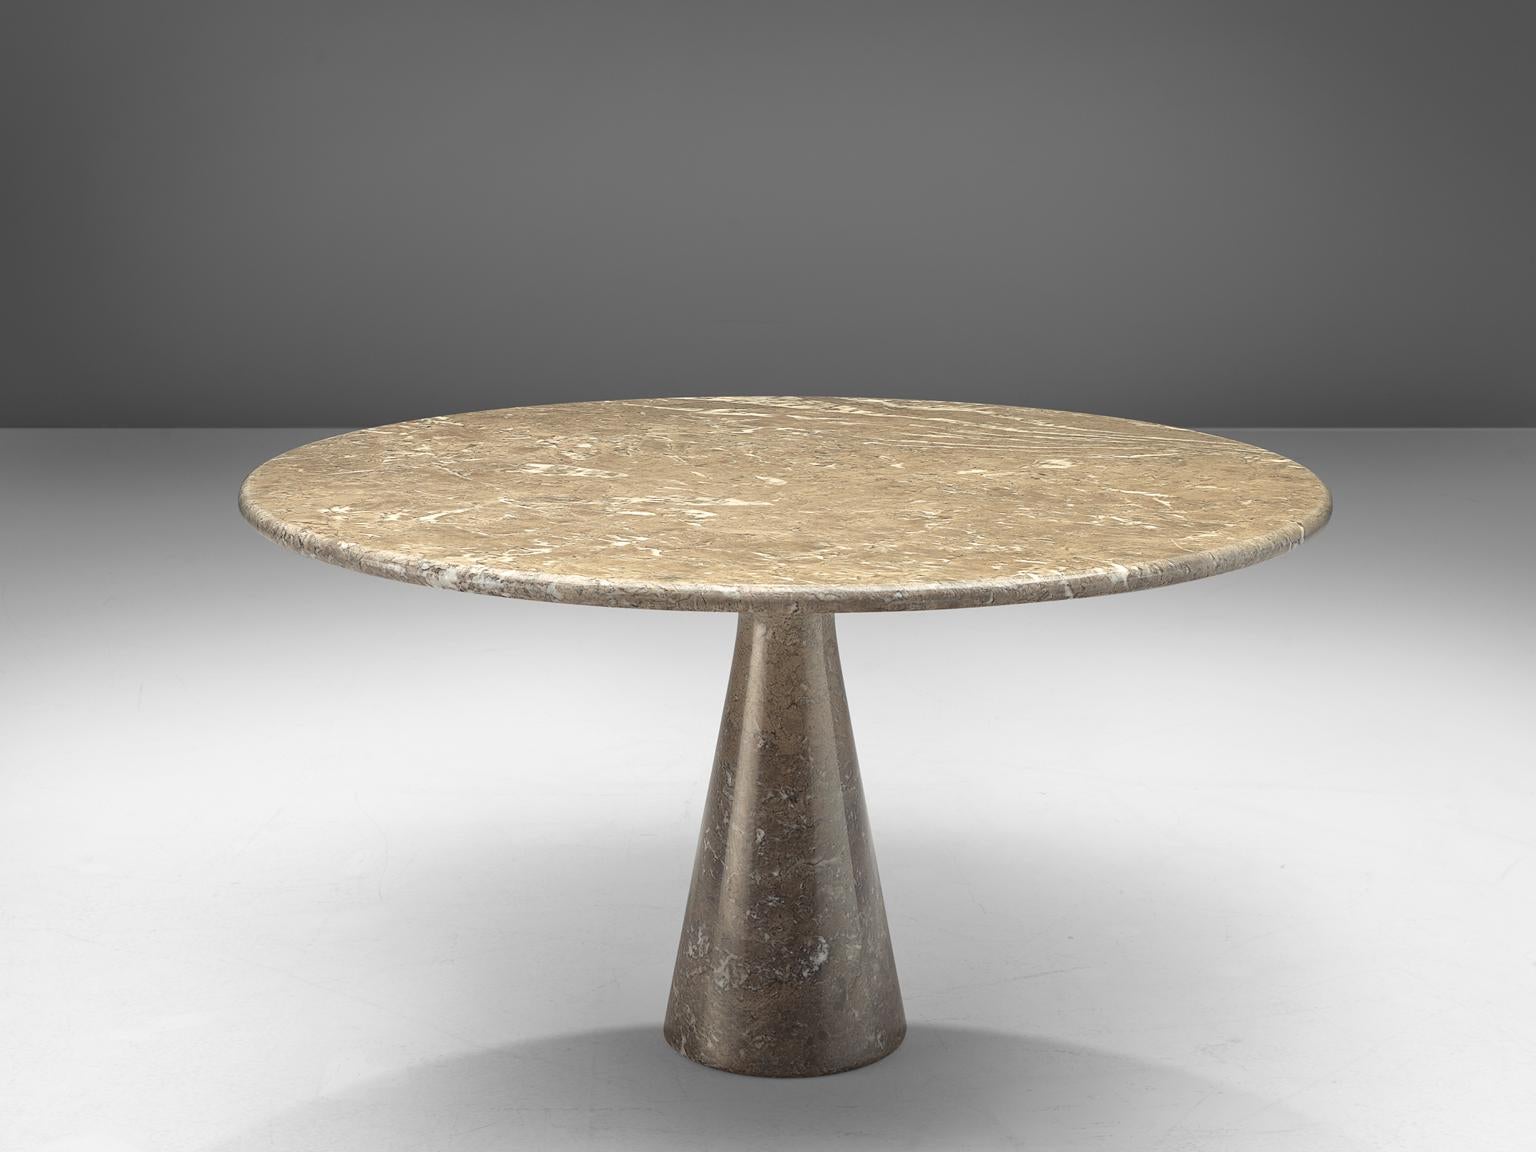 Angelo Mangiarotti for Skipper, table M1, marble, Italy, 1969.

This patterned brown to greyish table has a cone shaped base and a circular top. The circular top rests perfectly on the cone. The design showcases a play of balance and rhythm. The